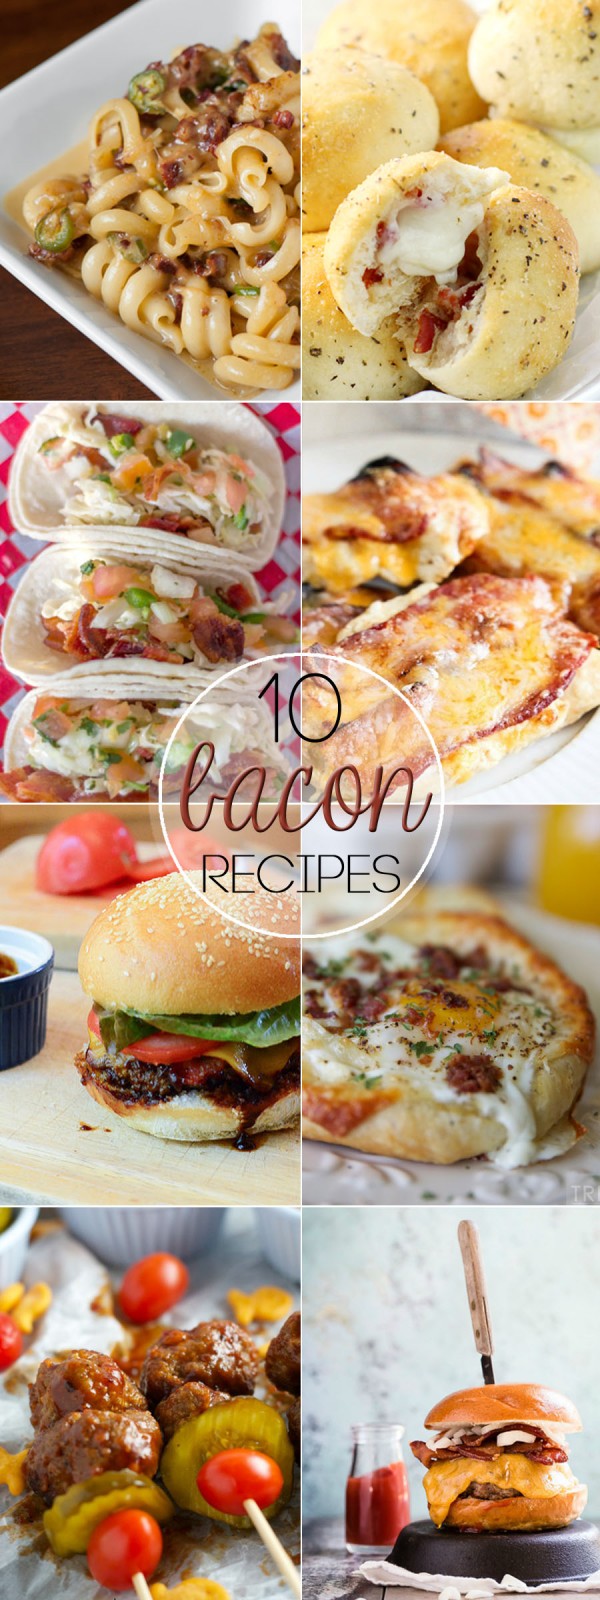 10 Bacon Recipes - 10 Bloggers team up to show you their best bacon recipes!